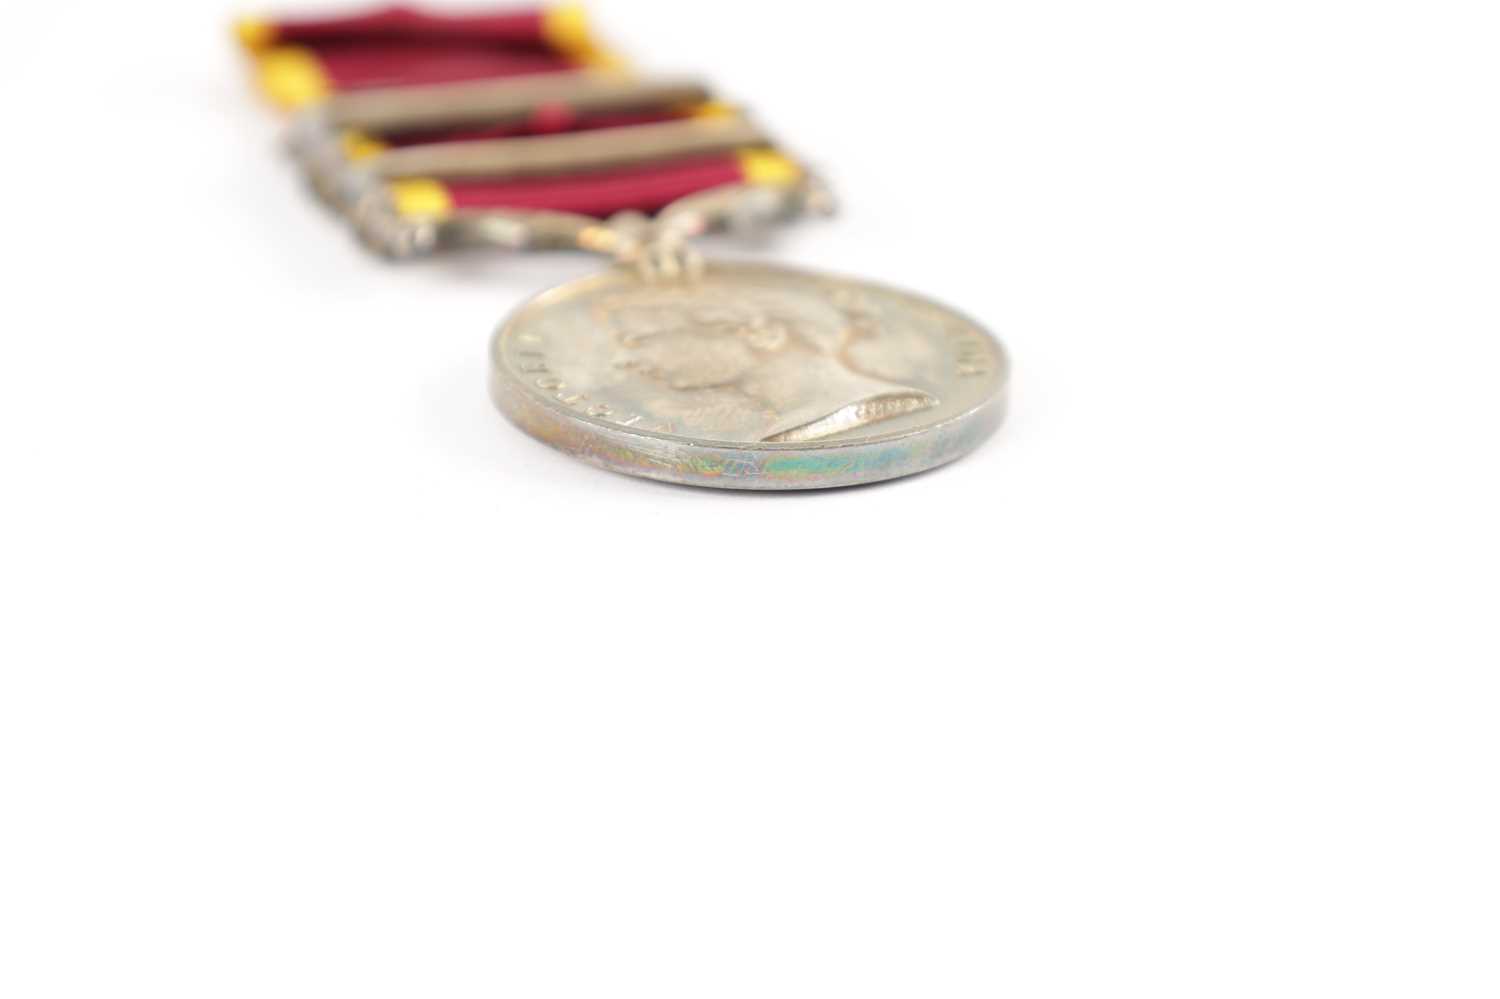 SECOND CHINA WAR MEDAL WITH TWO CLASPS - Image 6 of 6